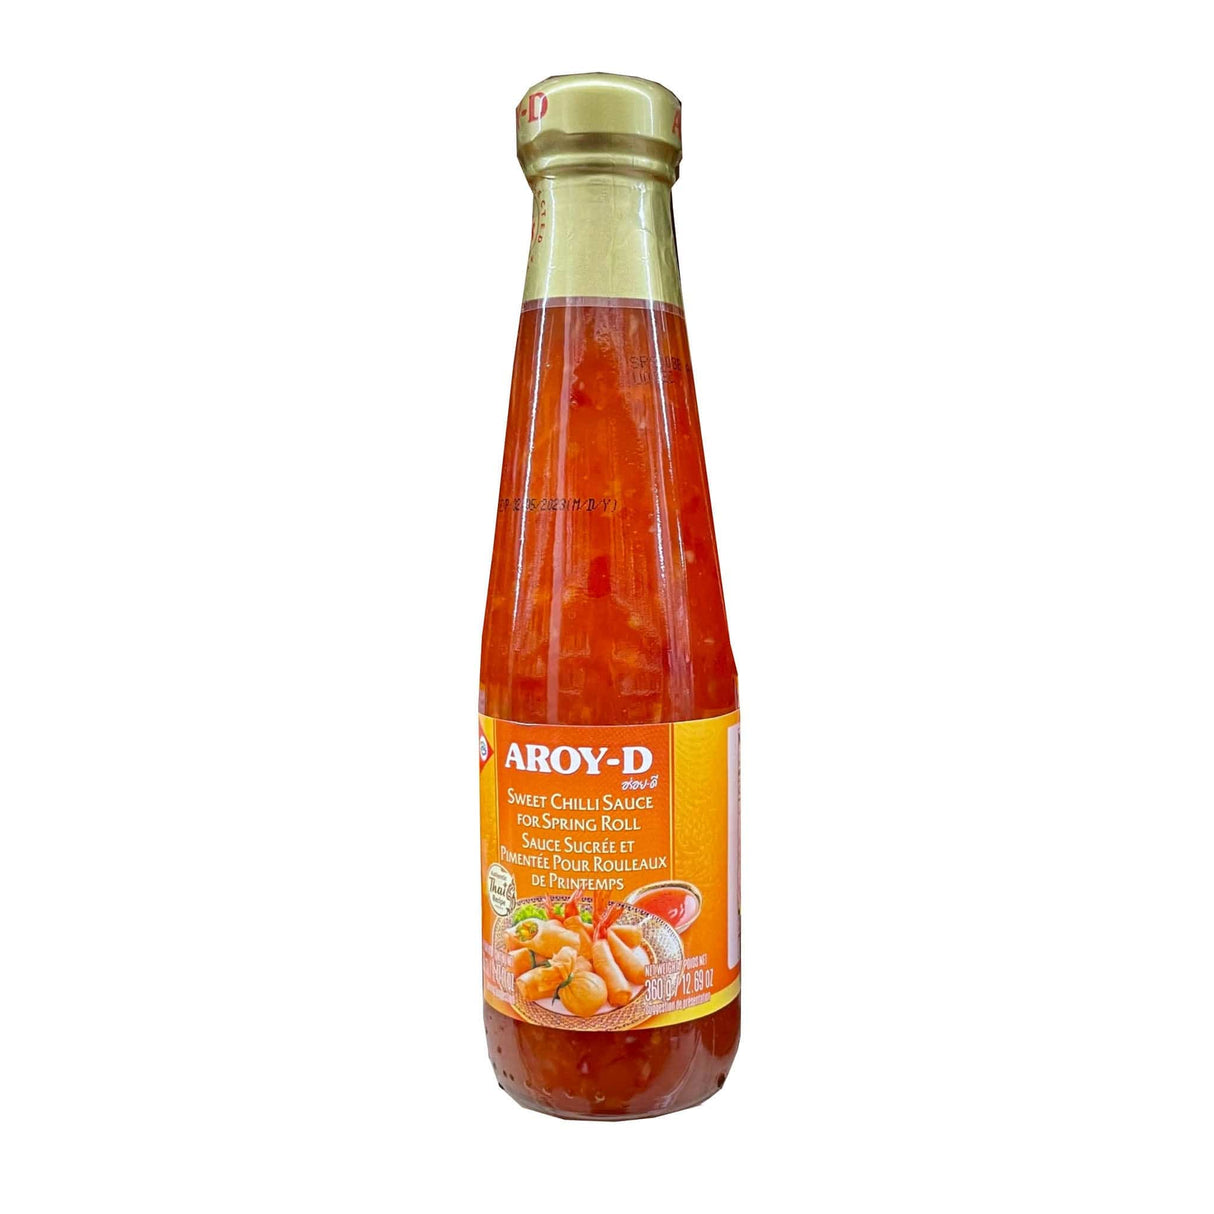 Aroy-d Sweet Chilli Sauce For Spring Roll